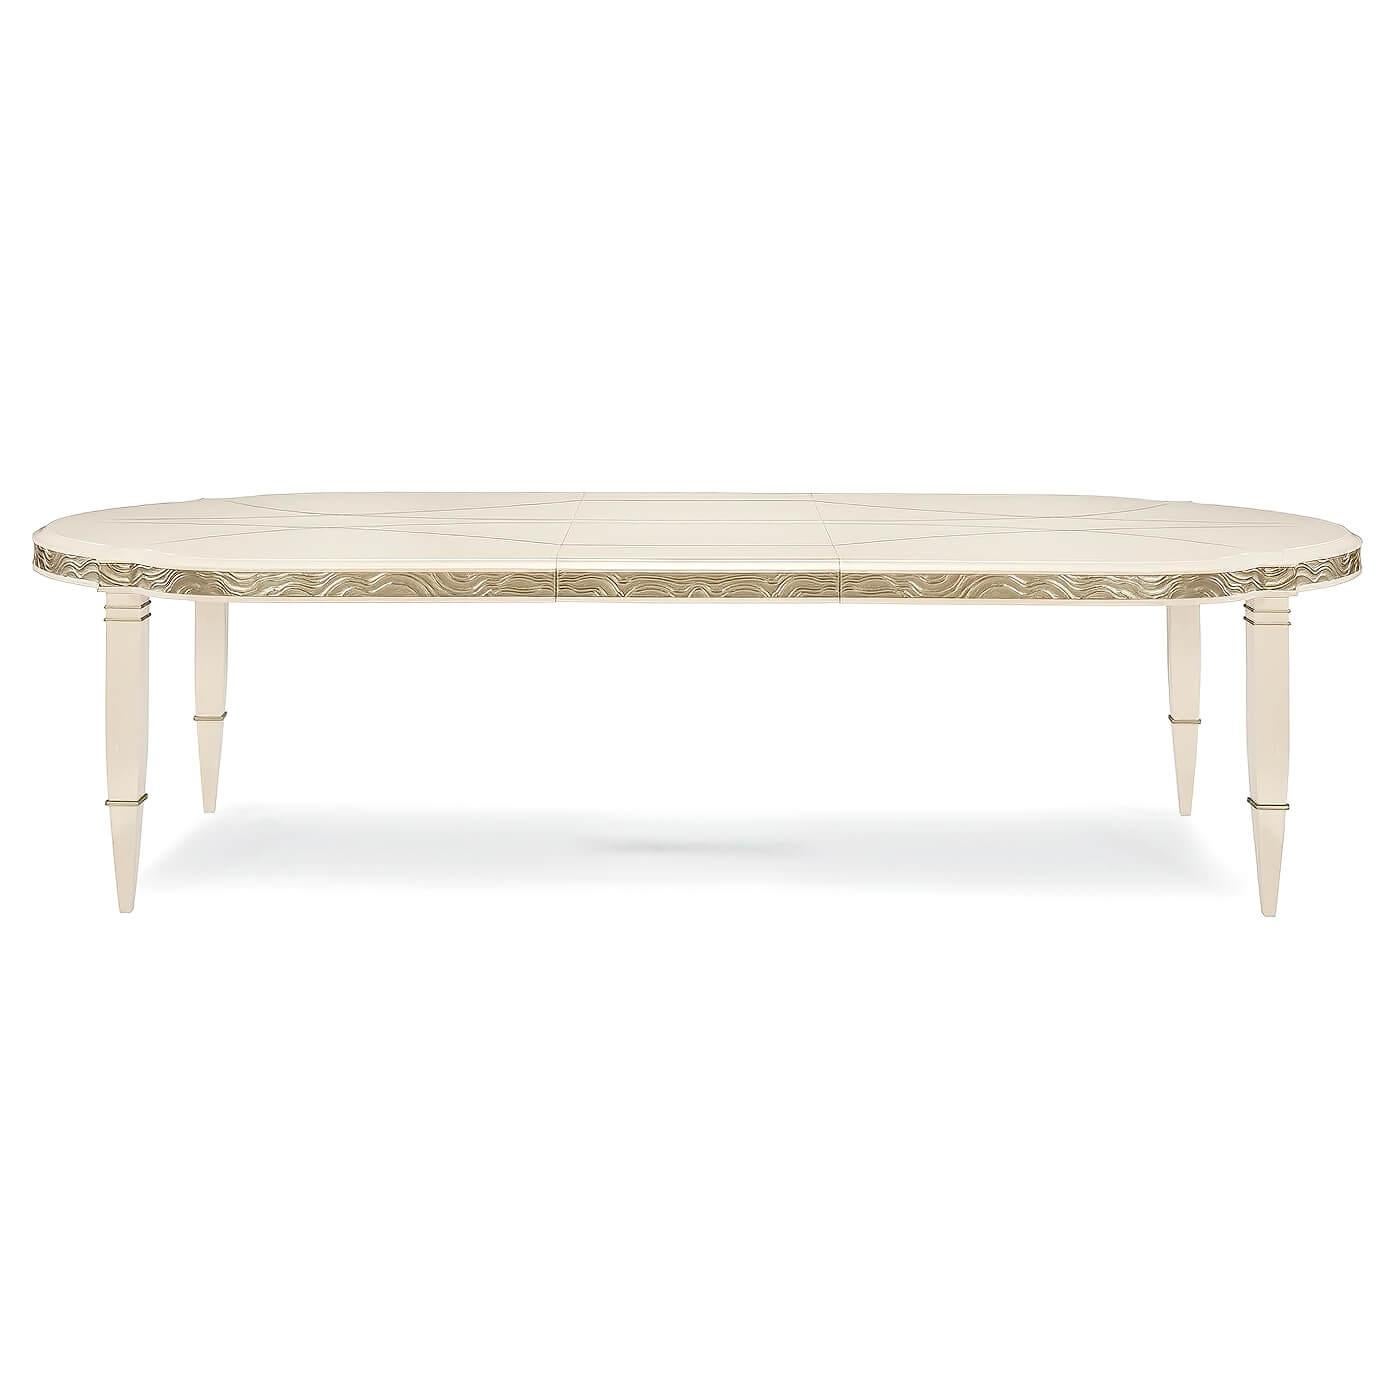 Asian Contemporary Oval Extending Dining Table For Sale